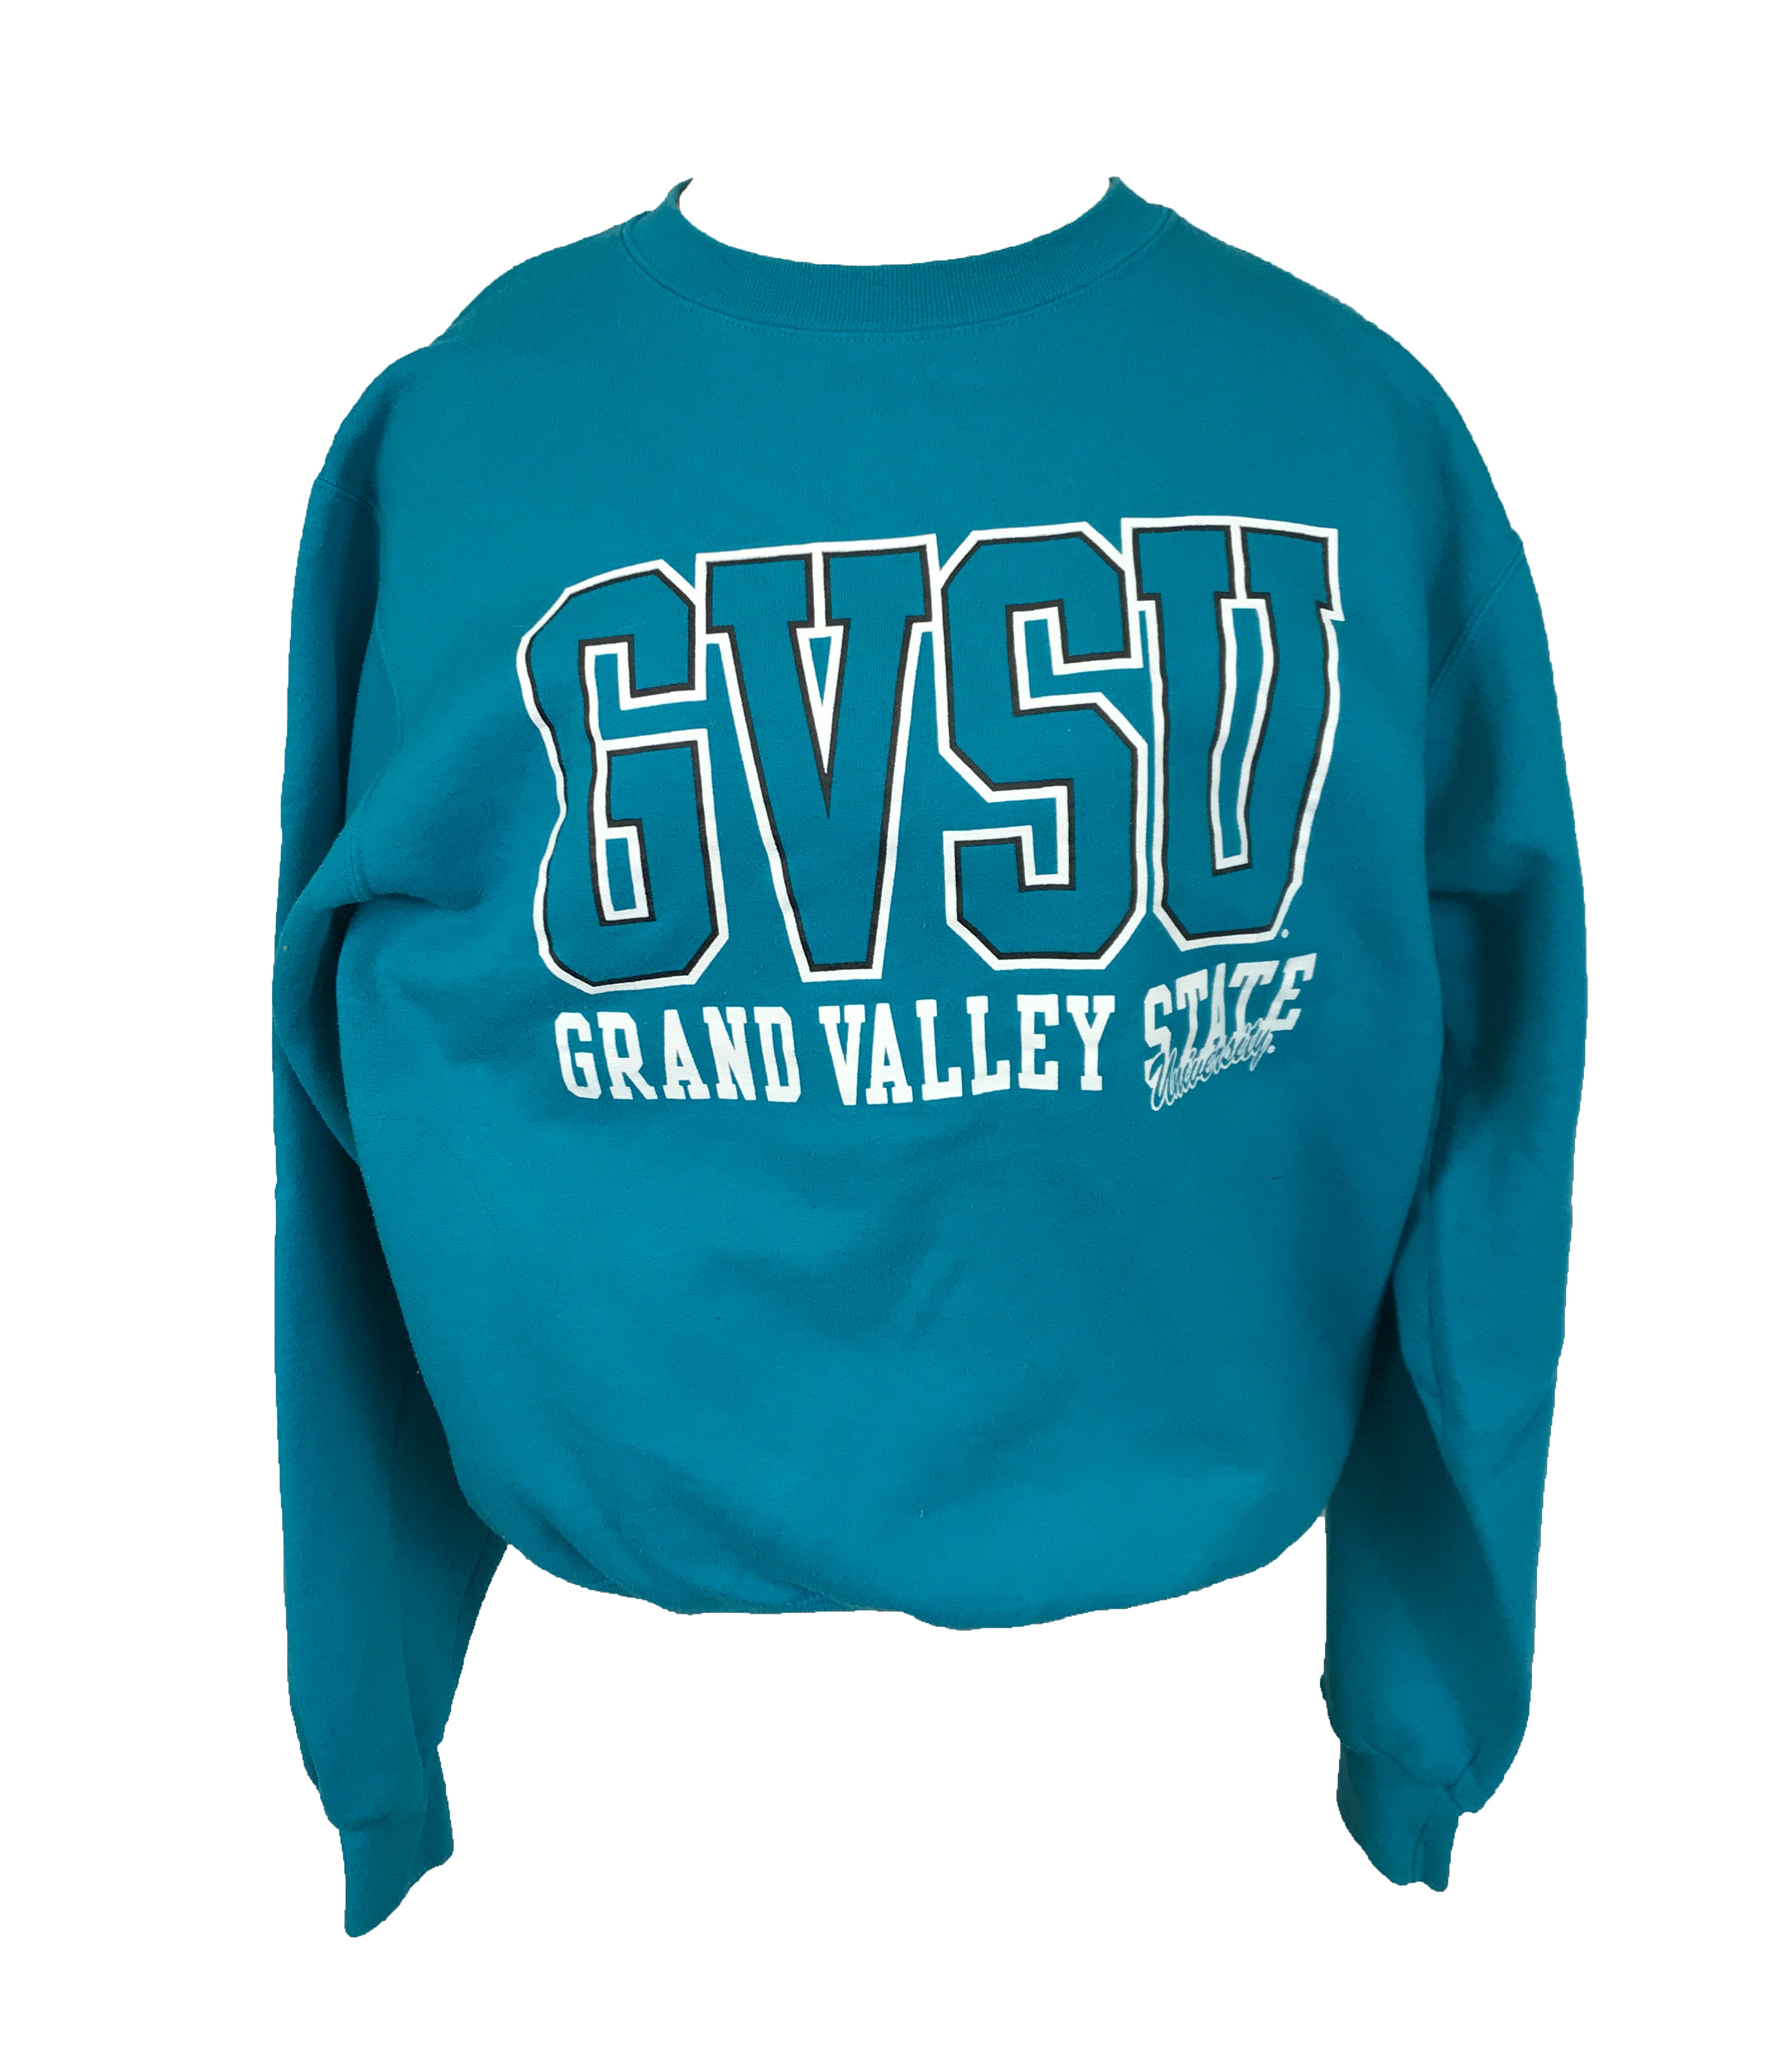 Champion Grand Valley State Pullover Unisex Size Small